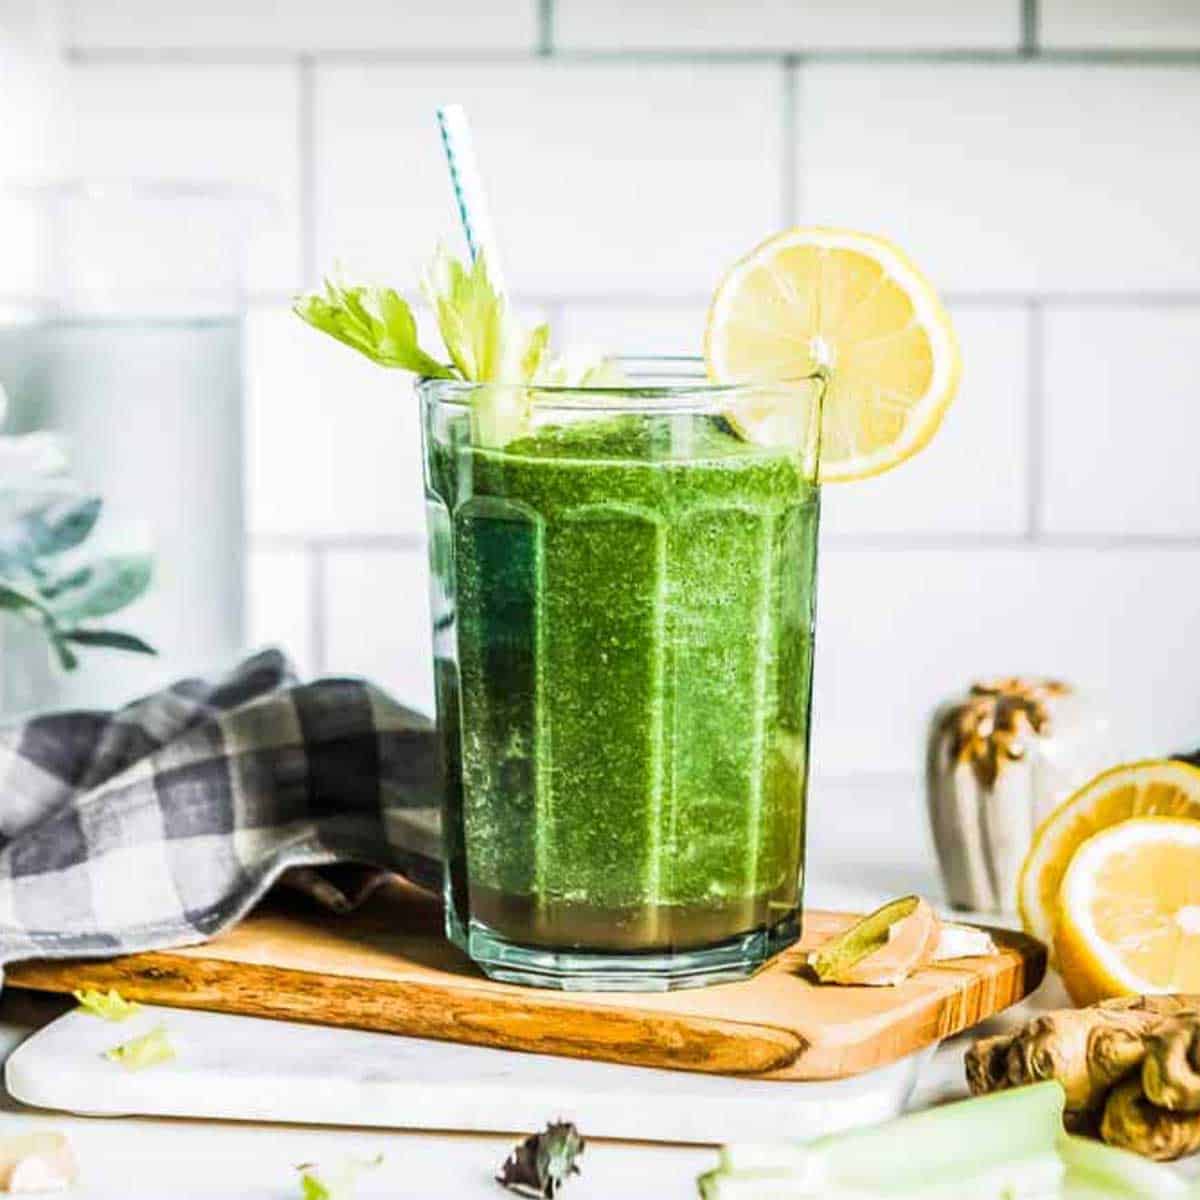 green smoothie in a glass cup with a straw and lemon garnish on a wooden cutting board.